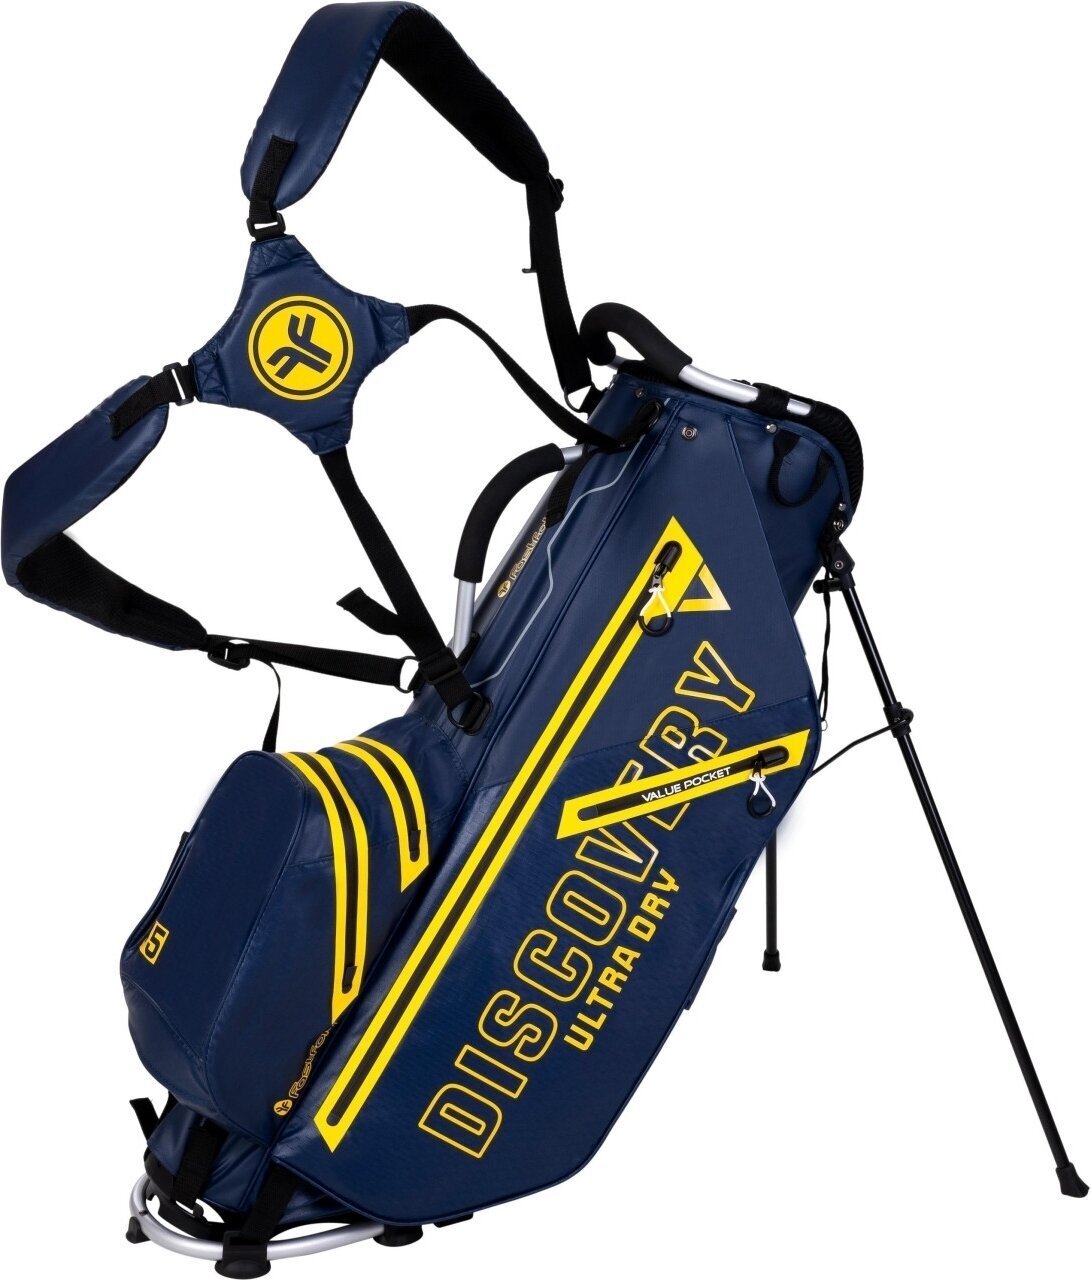 Stand Bag Fastfold Discovery Stand Bag Navy/Yellow